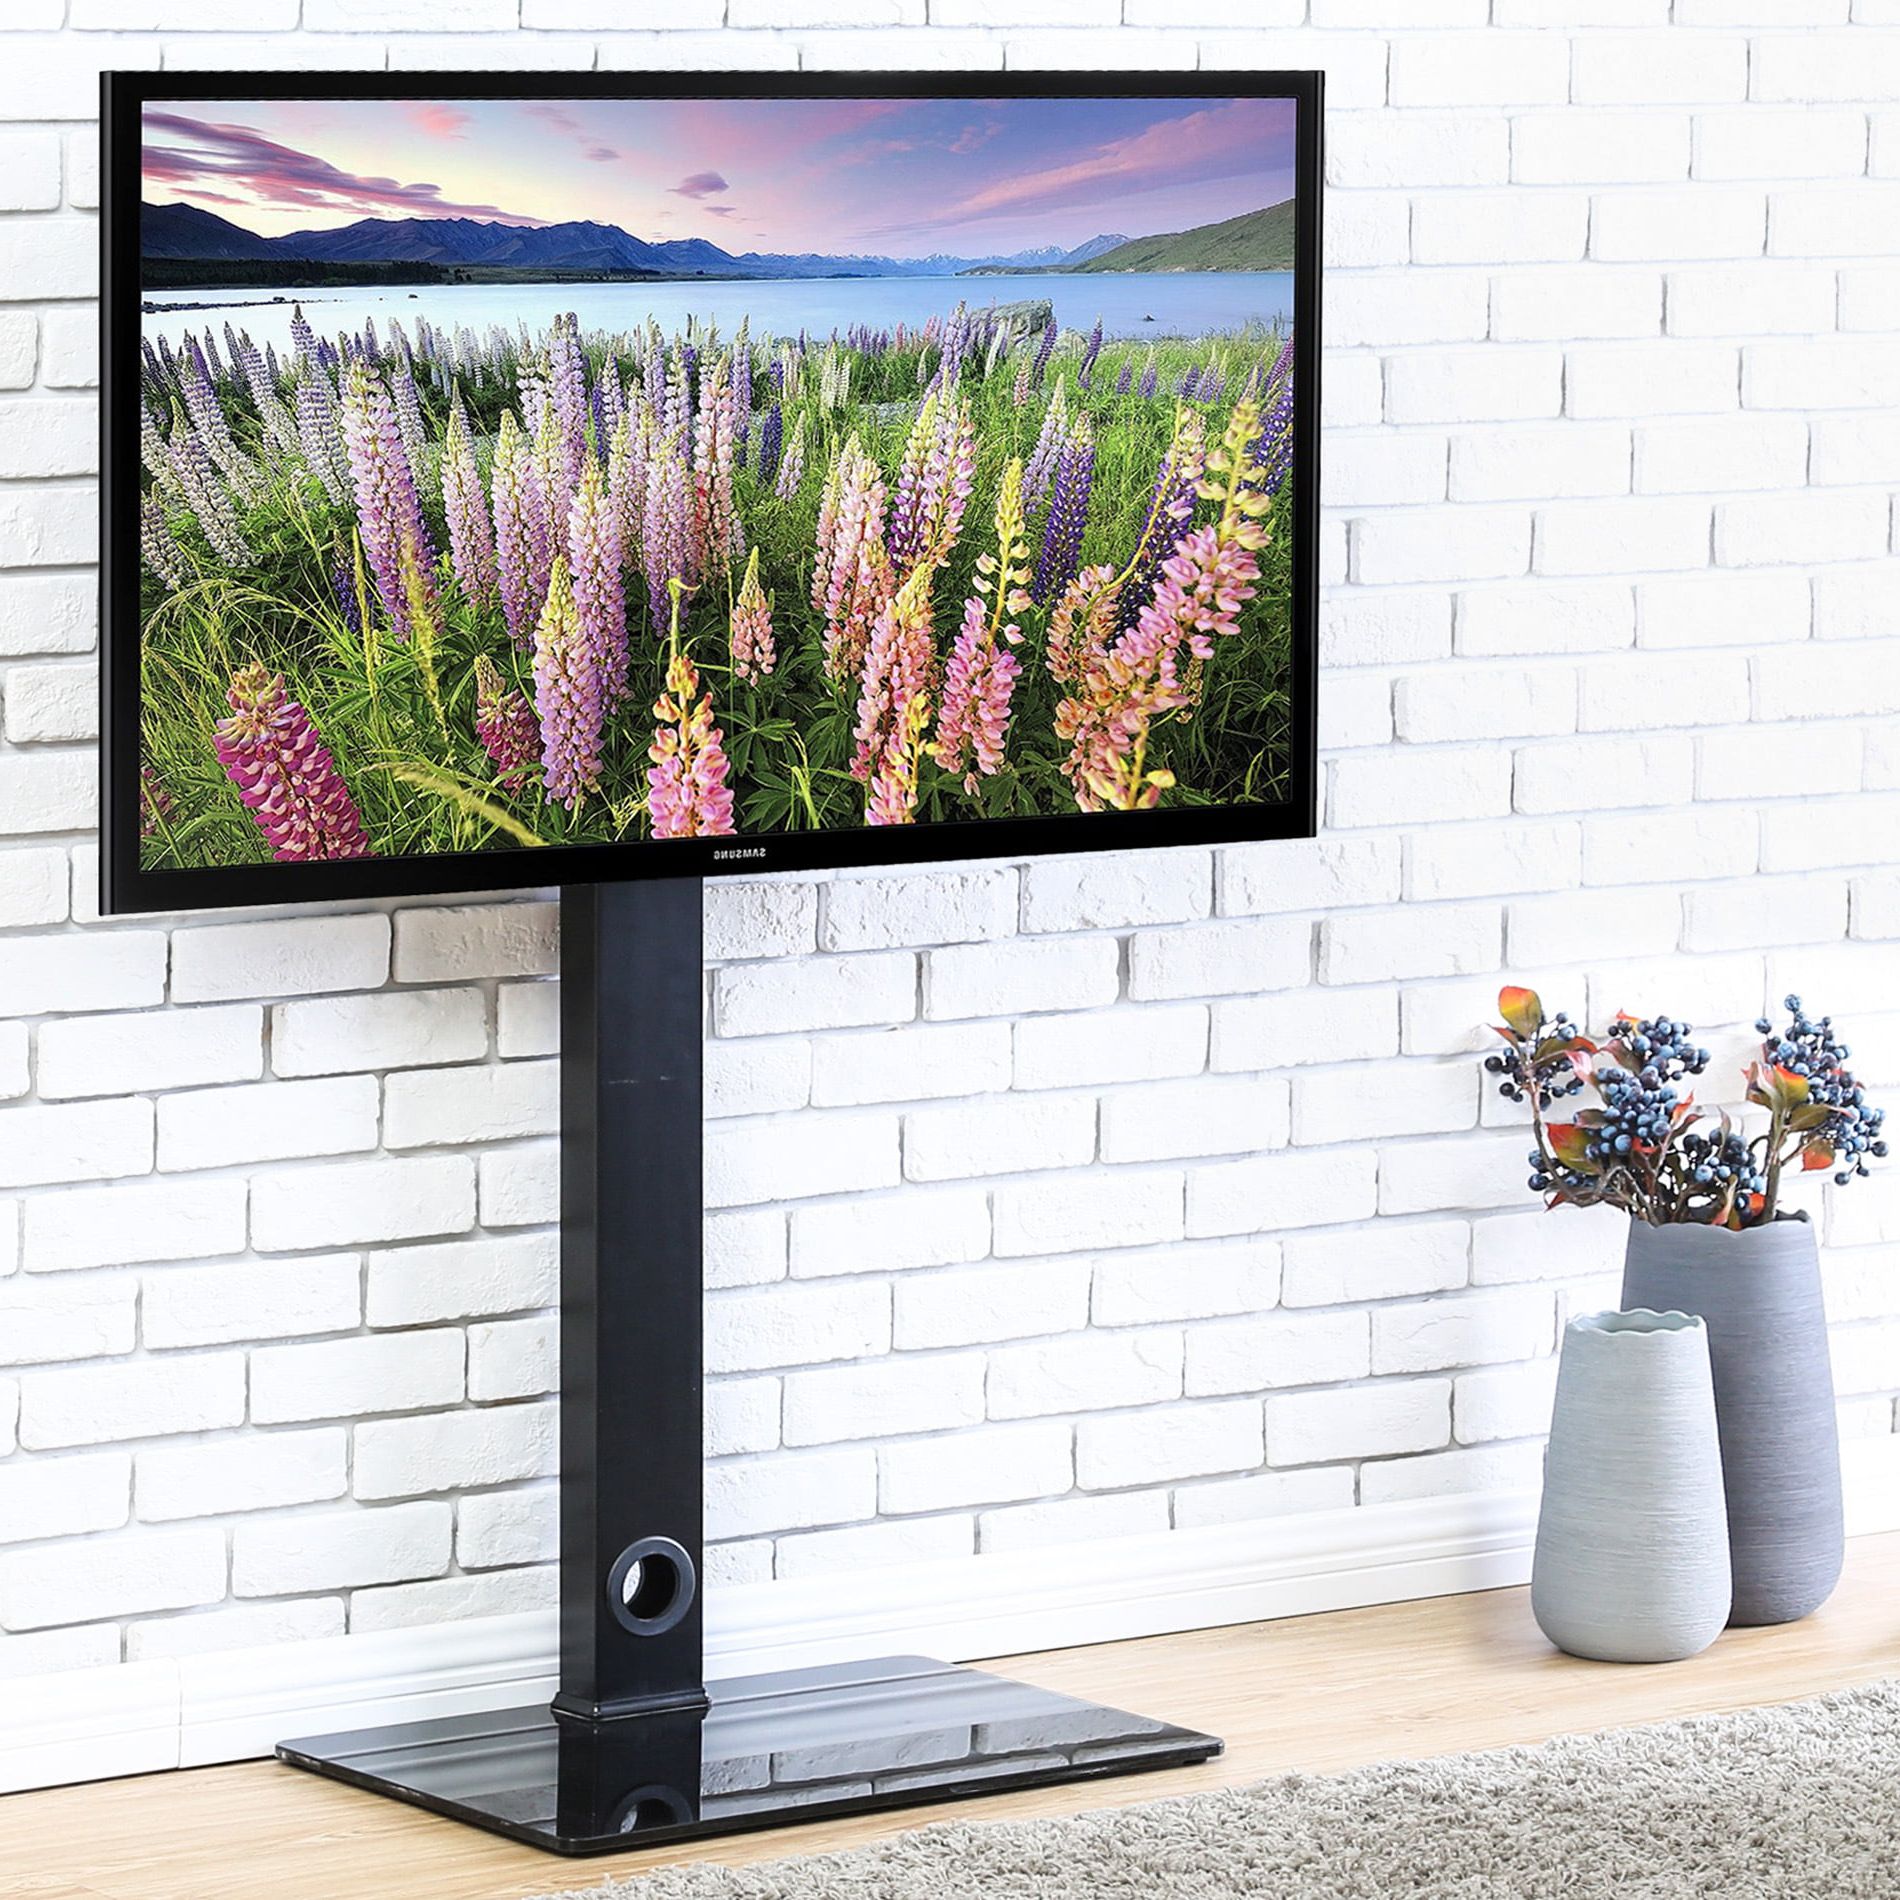 Most Recent Fitueyes Universal Floor Tv Stand With Swivel Mount, For Most Of 26 To Pertaining To Universal Floor Tv Stands (Photo 1 of 15)